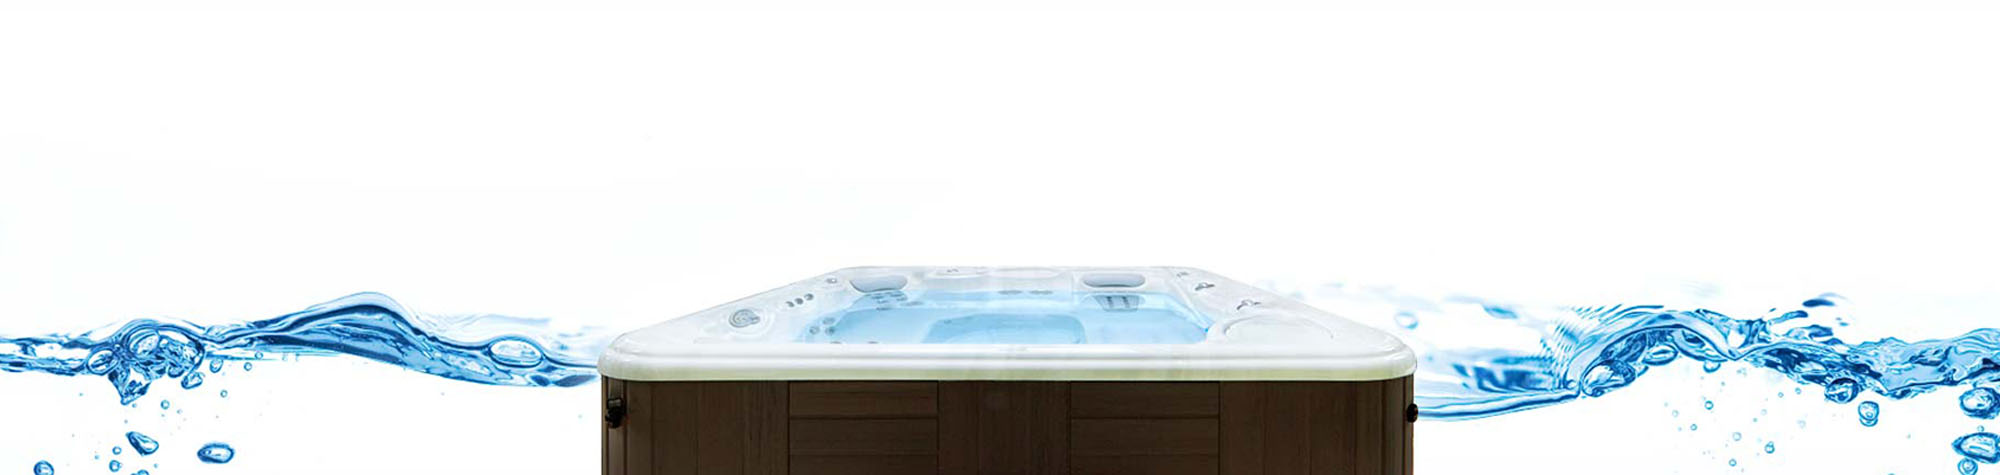 SpectraLight Hot Tub and Spa Models